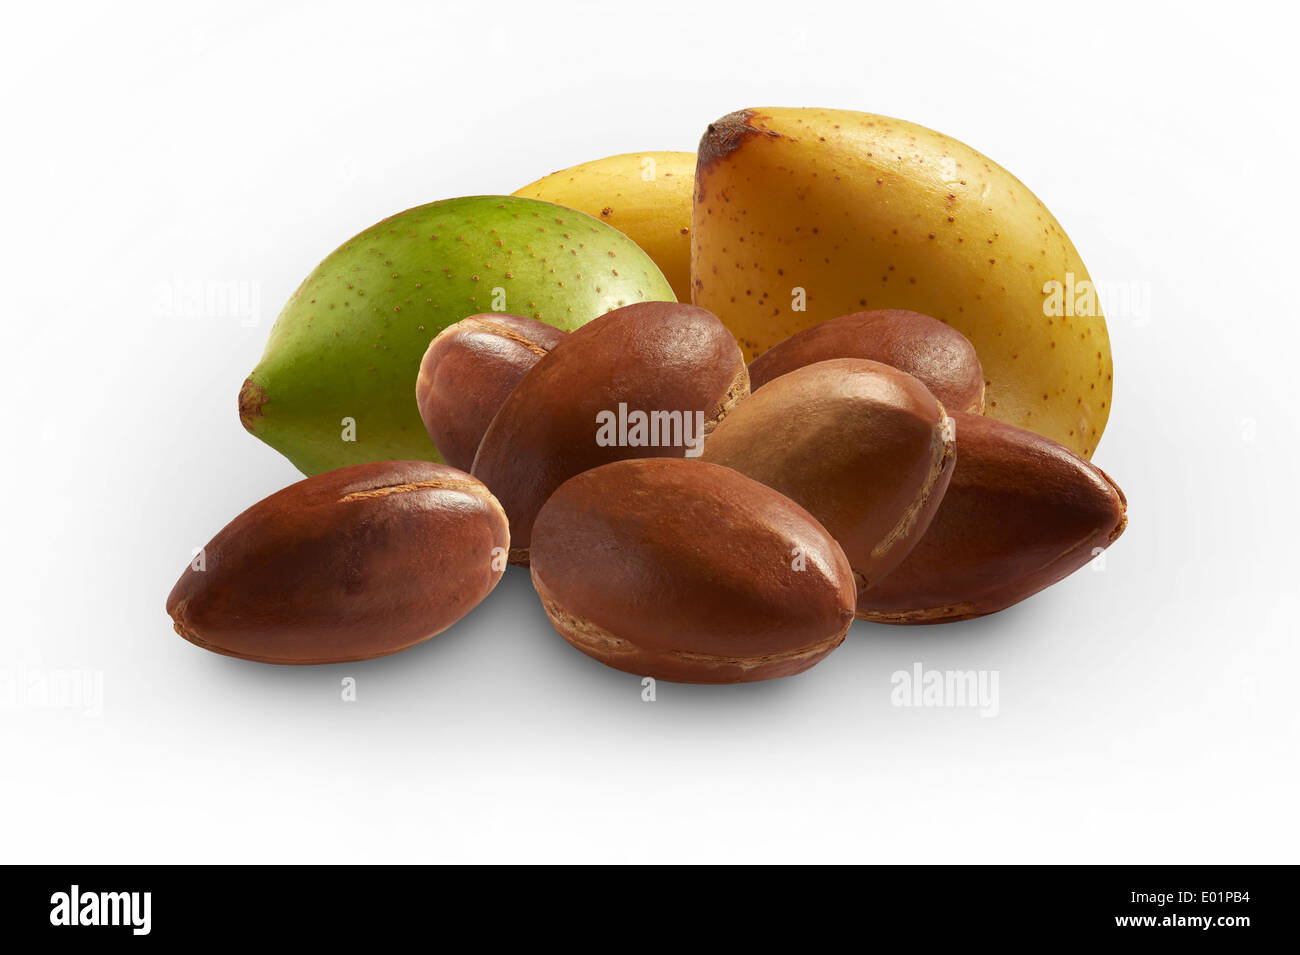 Fresh Argan nuts (Argania spinosa), peeled and unpeeled against a white background Stock Photo